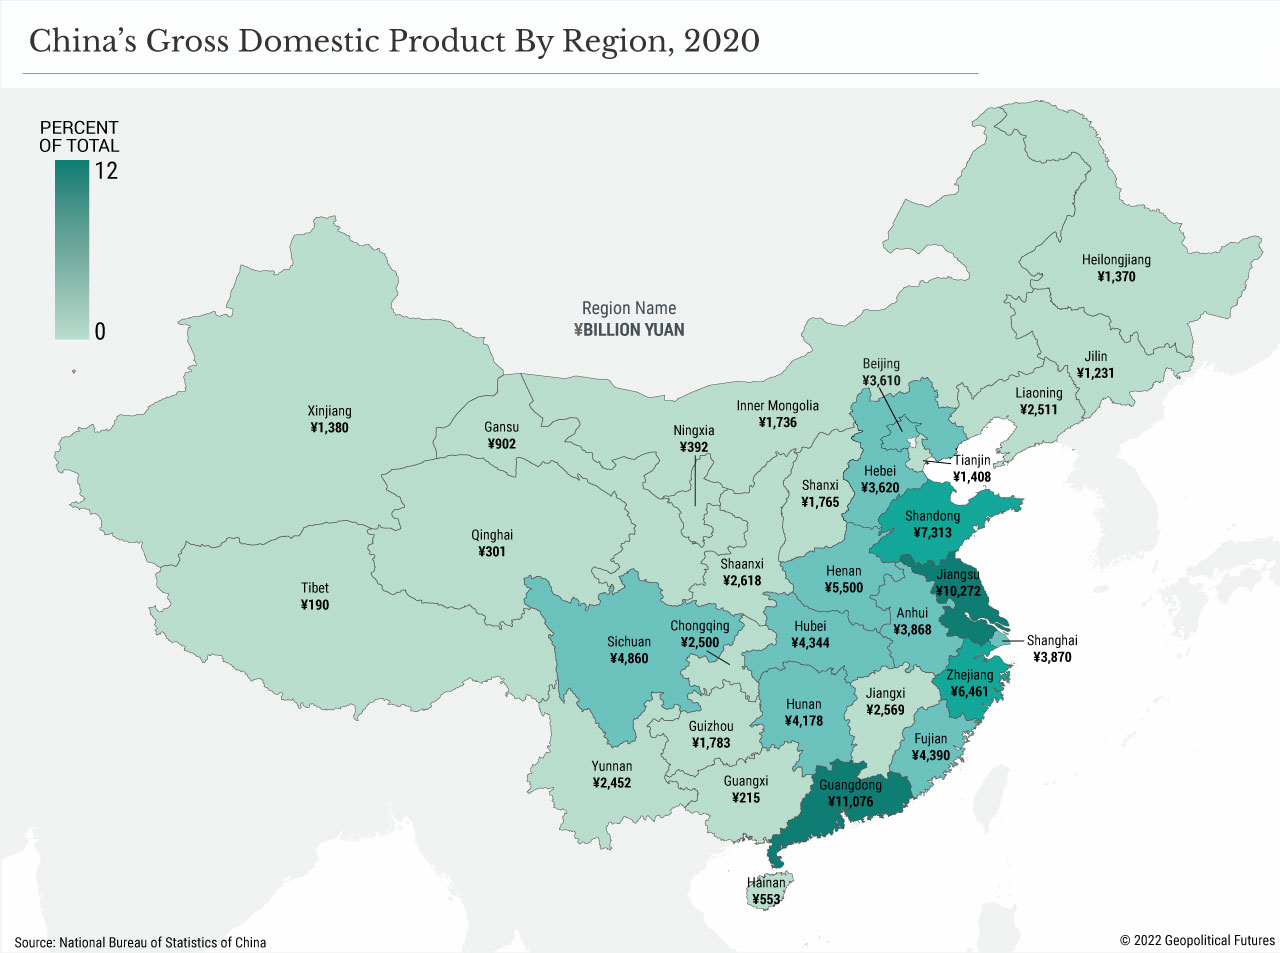 China's GDP By Region, 2020